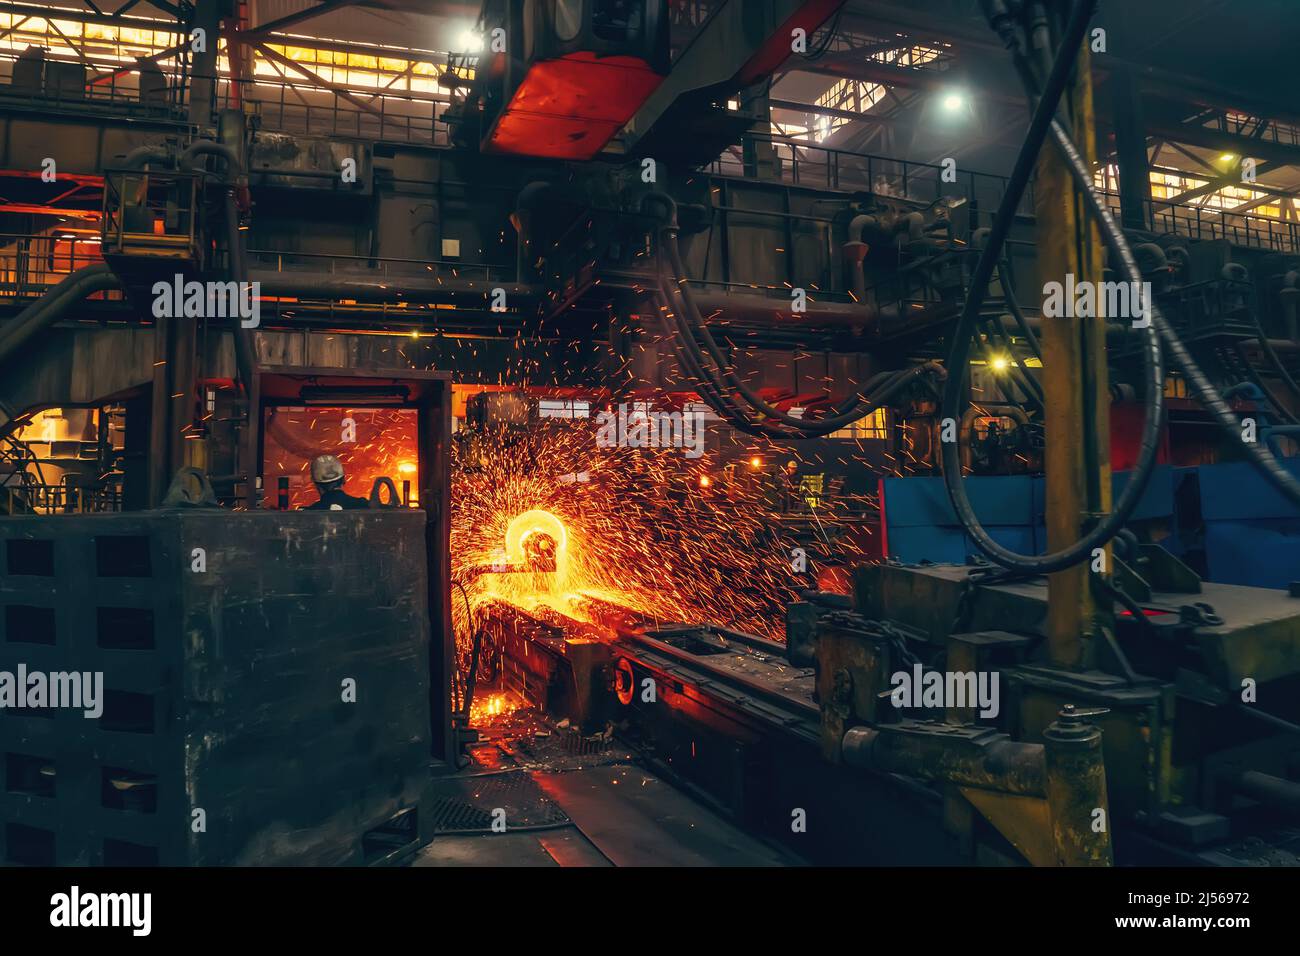 Metal casting in metallurgical plant or factory. Process of melting and forming production of iron pipes in industrial machines in workshop. Stock Photo